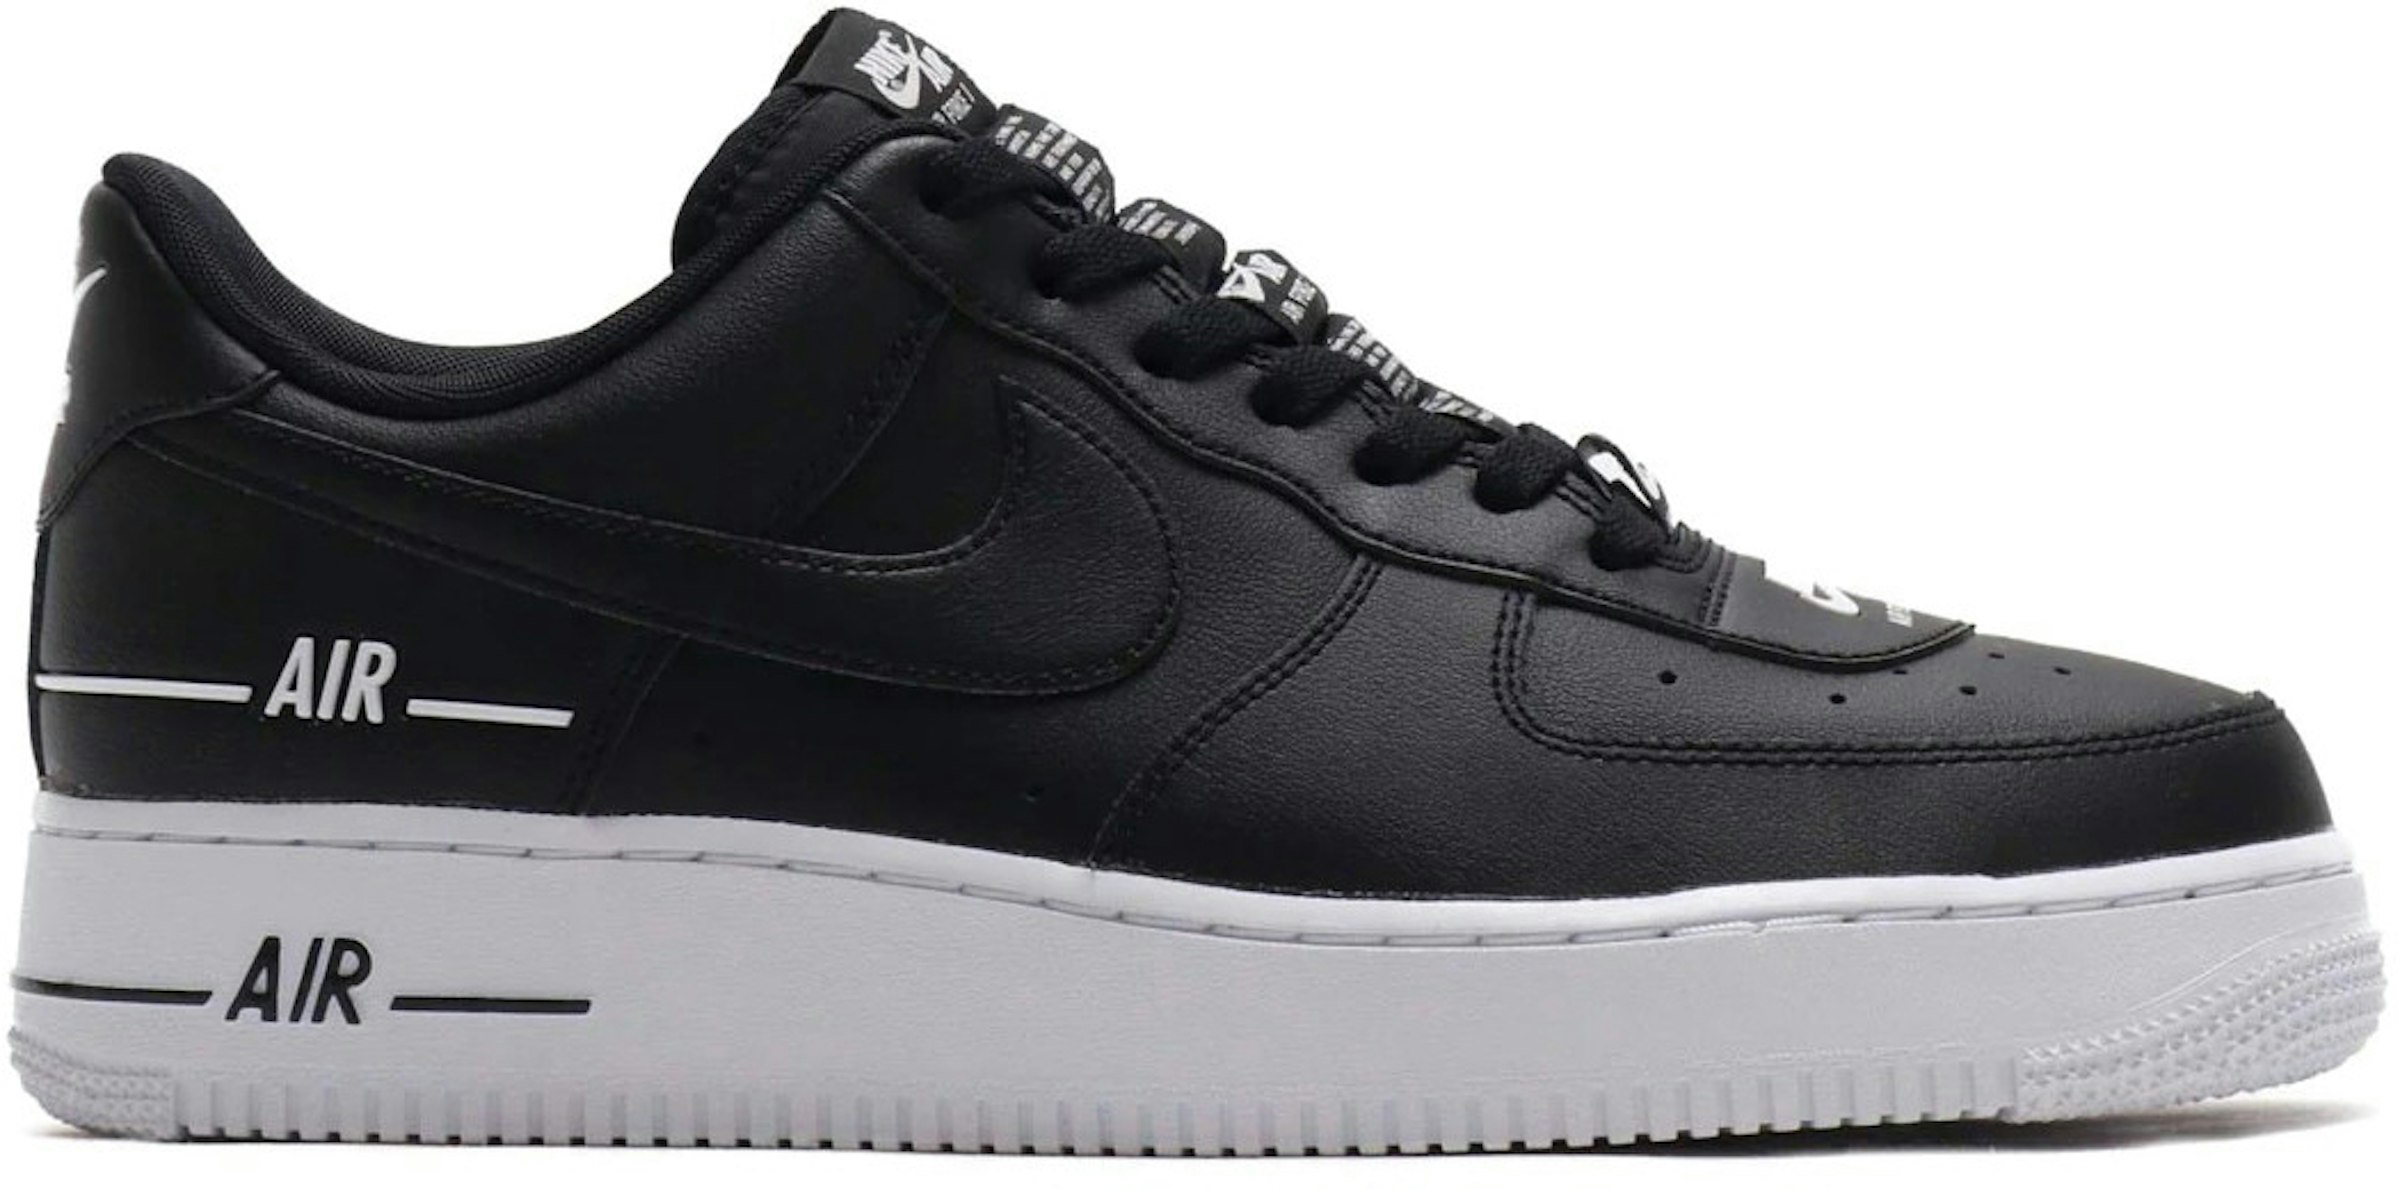 Nike Force 1 Low Double Air Low Black White Men's - US